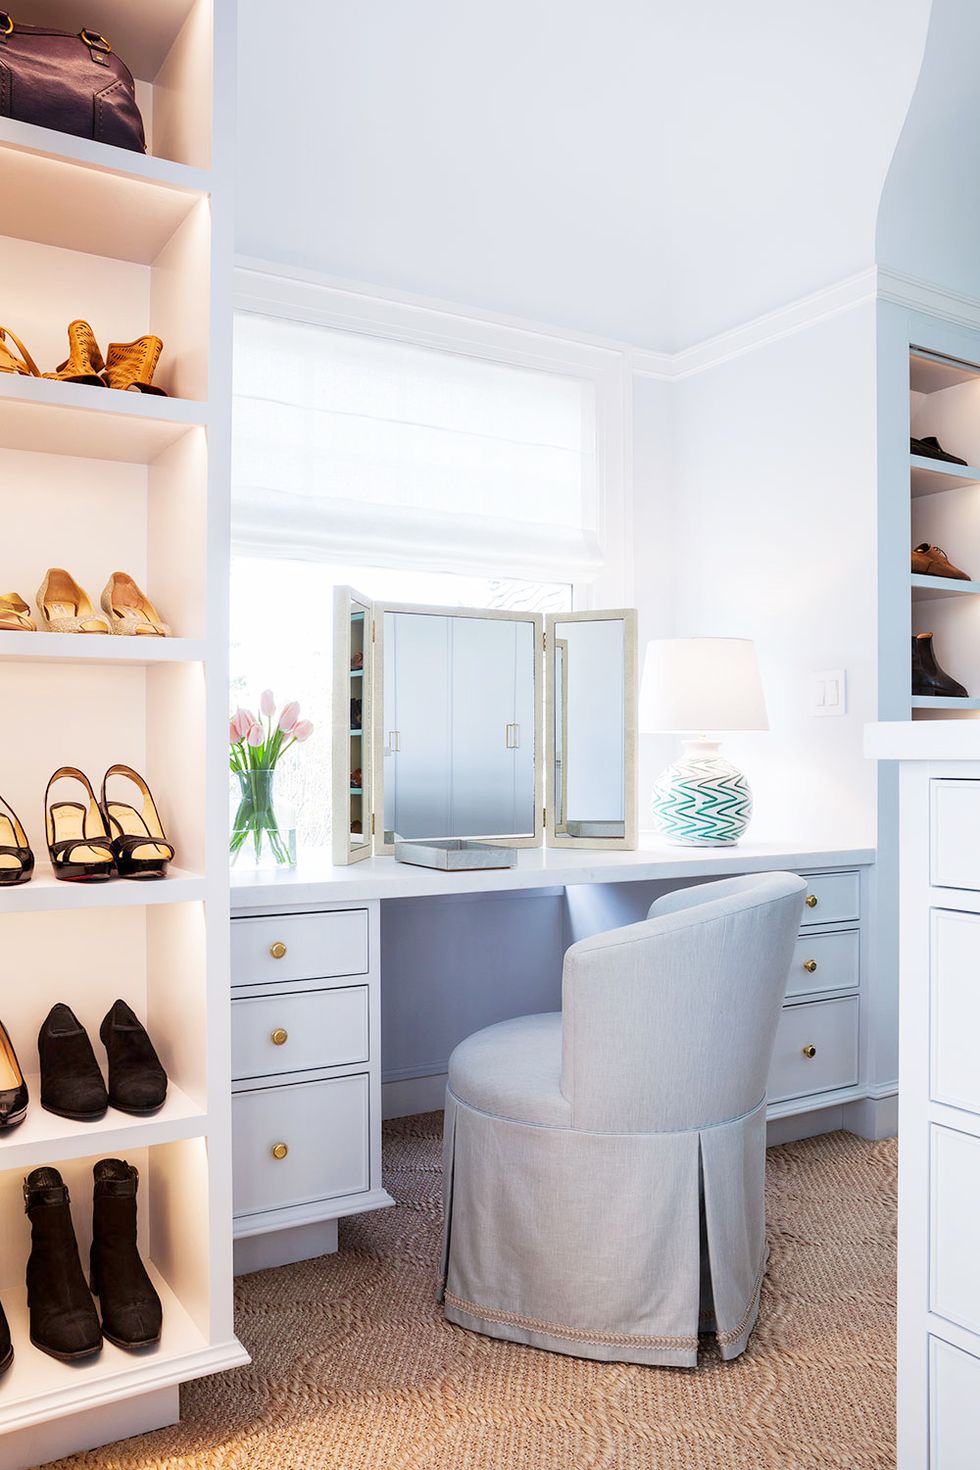 The best makeup storage ideas for small spaces